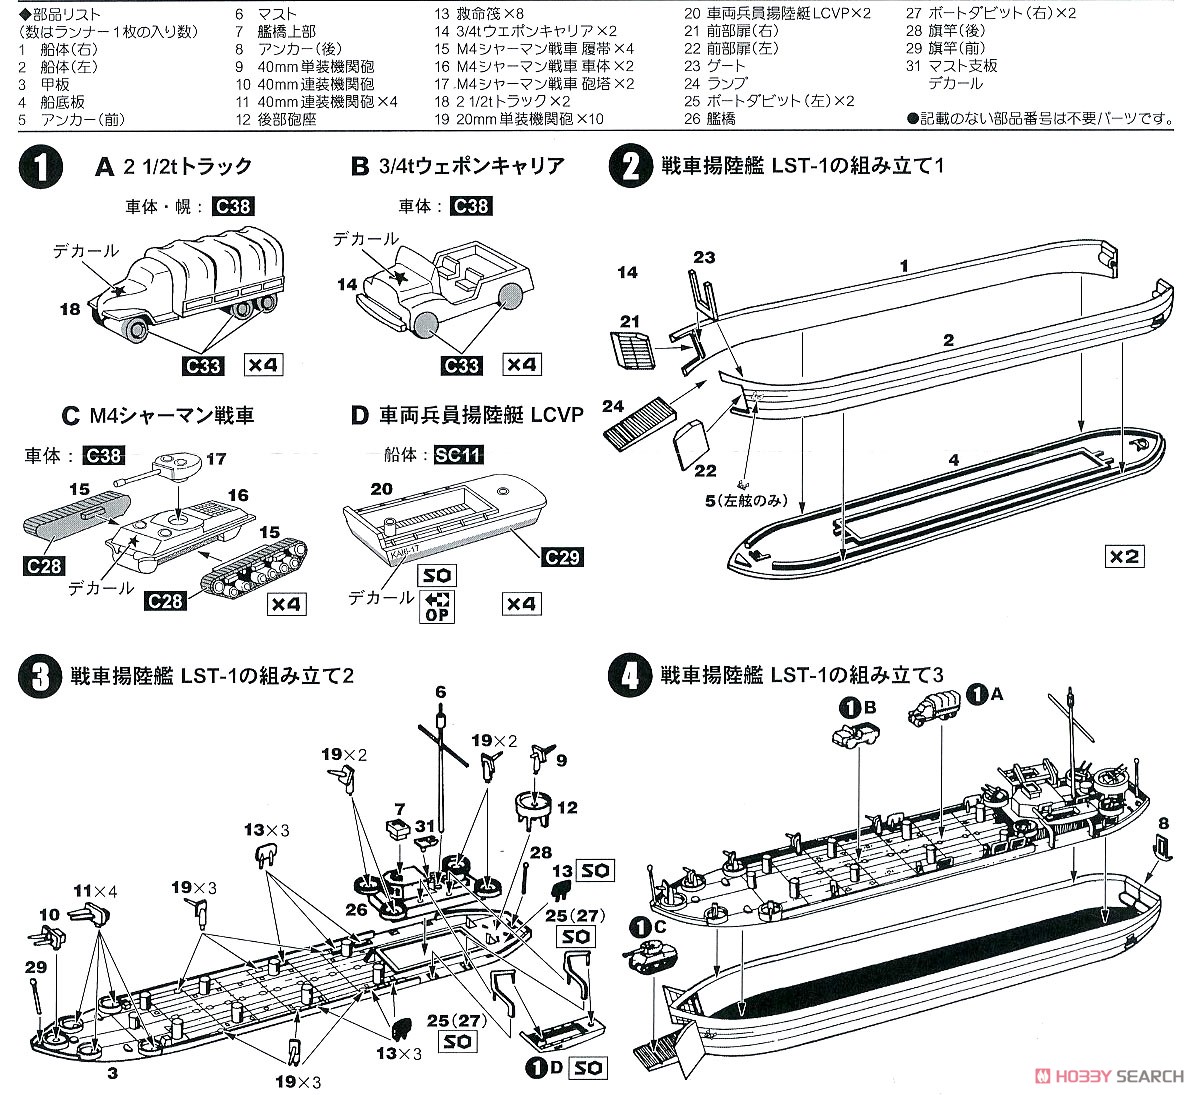 WWII Invasion of Iwo Jima (Plastic model) Assembly guide1